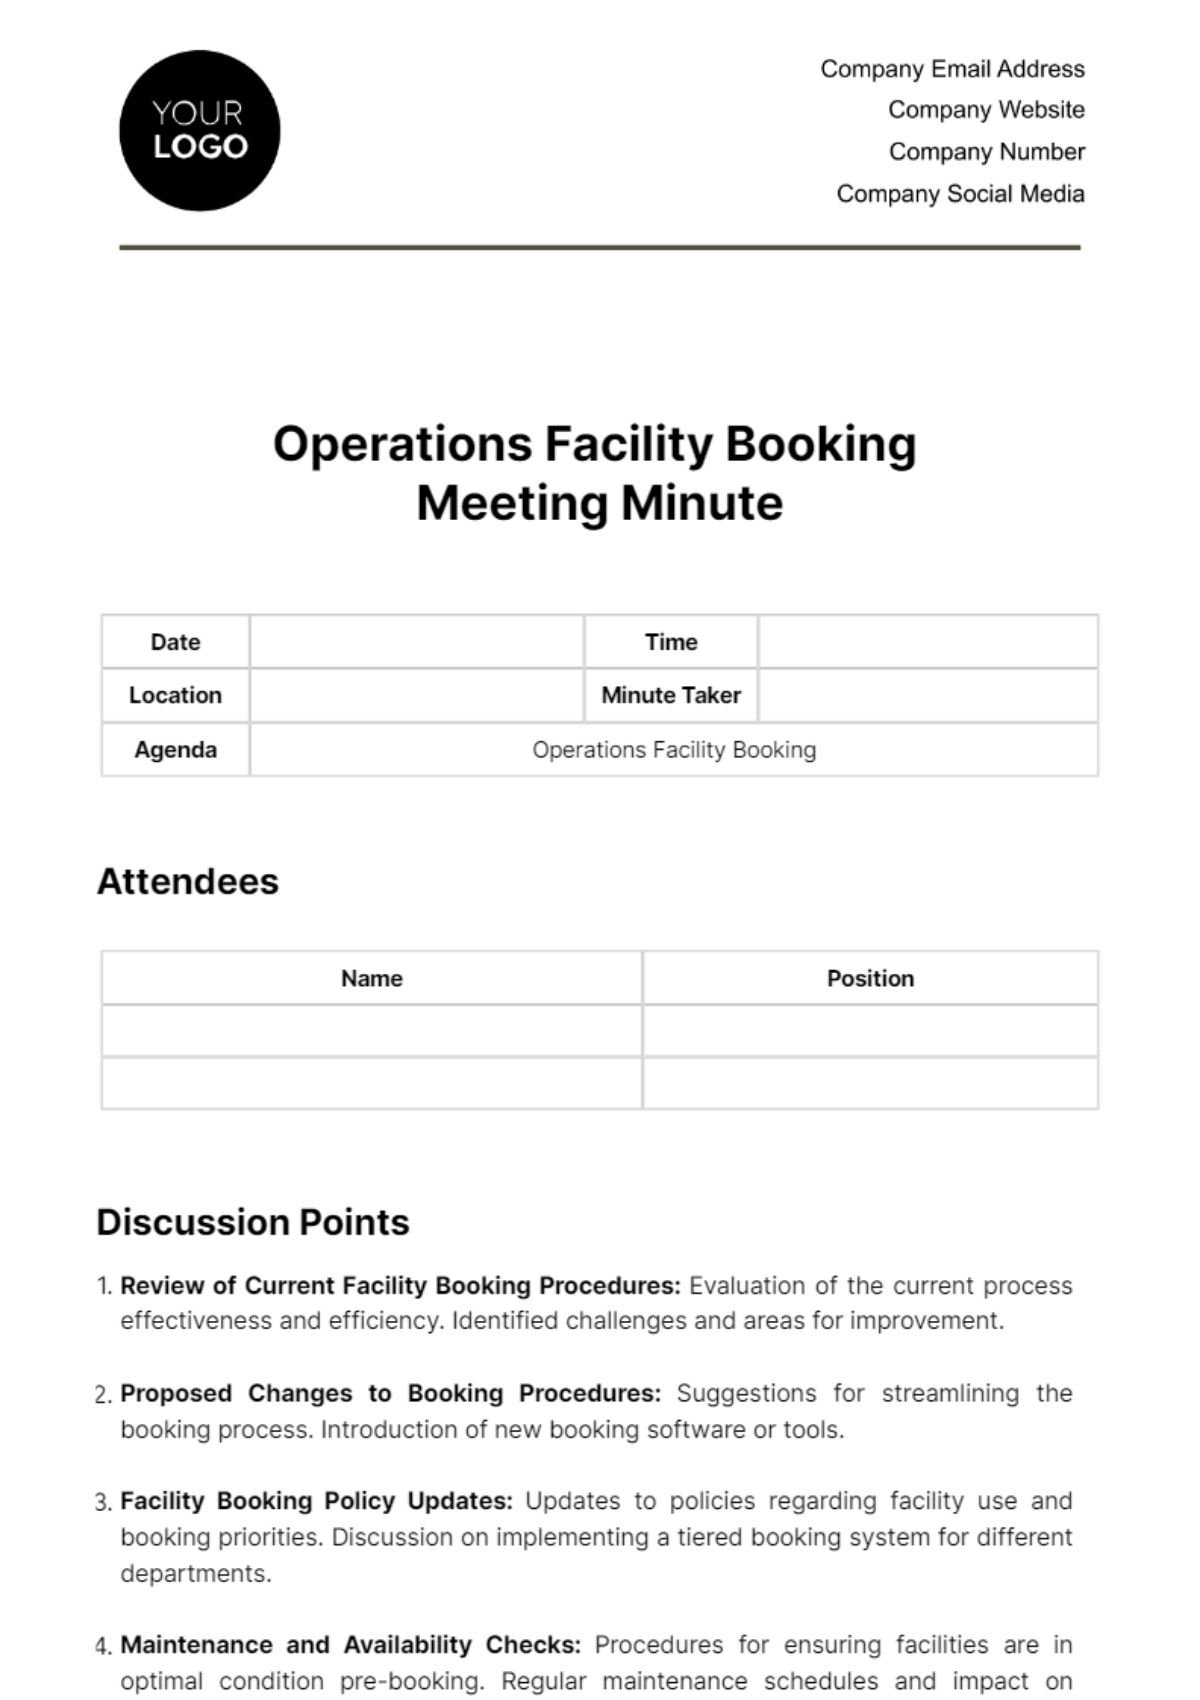 Free Operations Facility Booking Meeting Minute Template